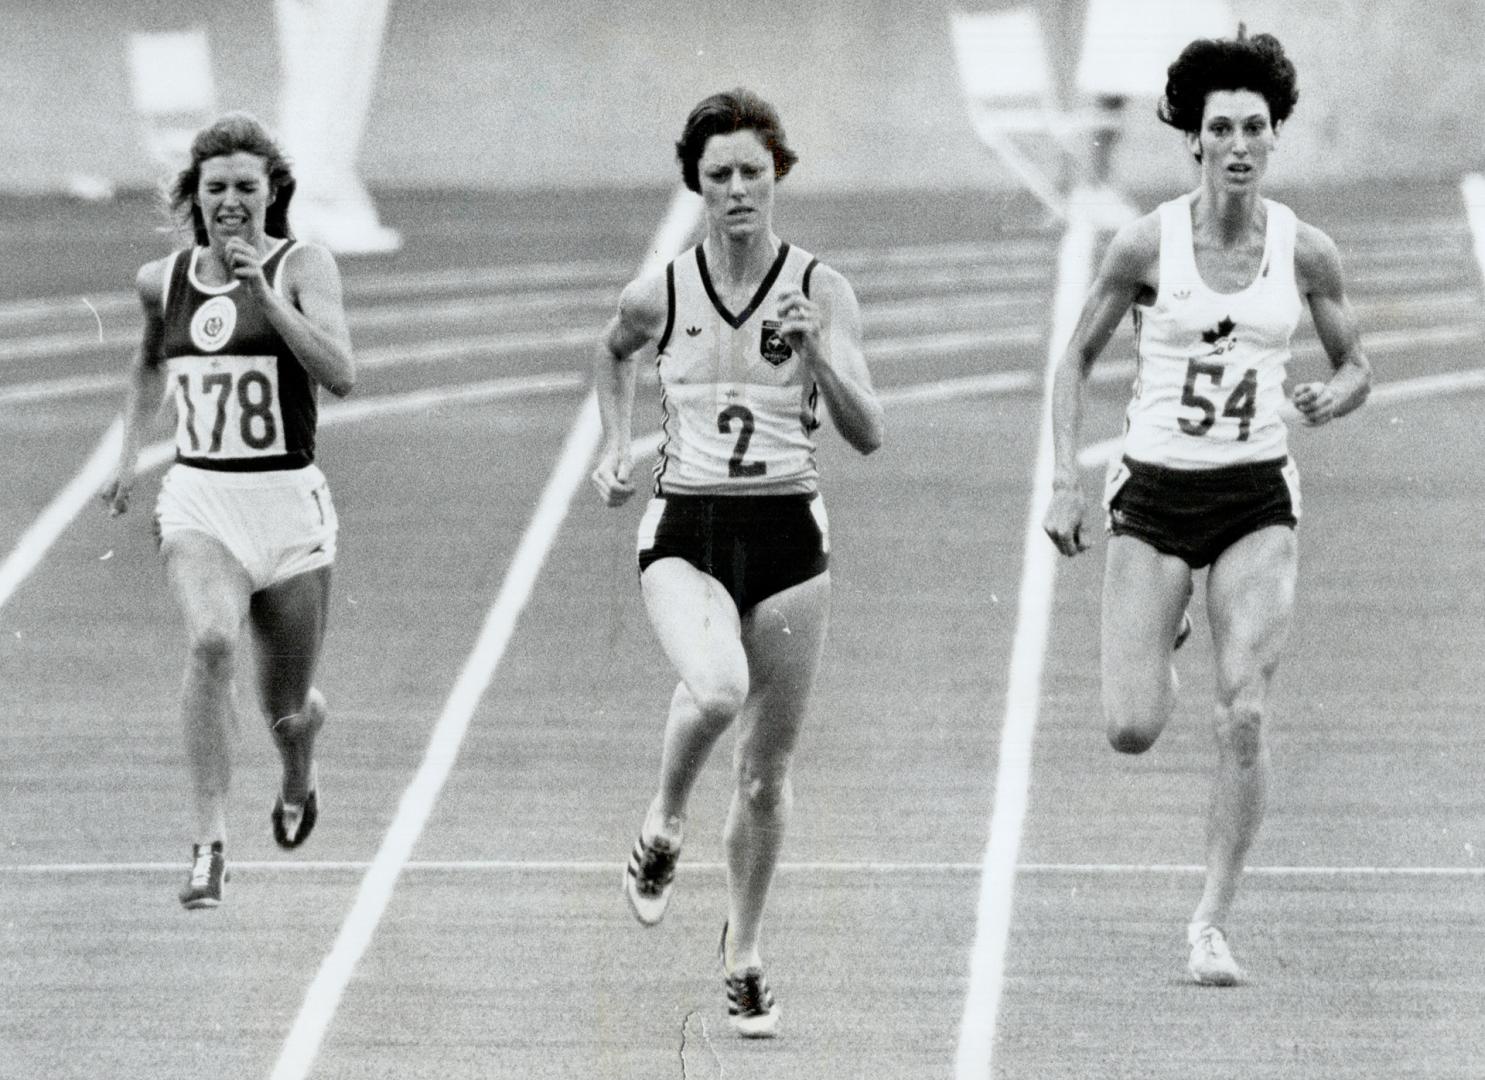 Women 200 metre final. Denise Boyd (2) of Australia wins in 22.82. She is flanked by Helen Golden (178) of Scotland (6th) and Patty Loverock ($54) of Canada (7th)